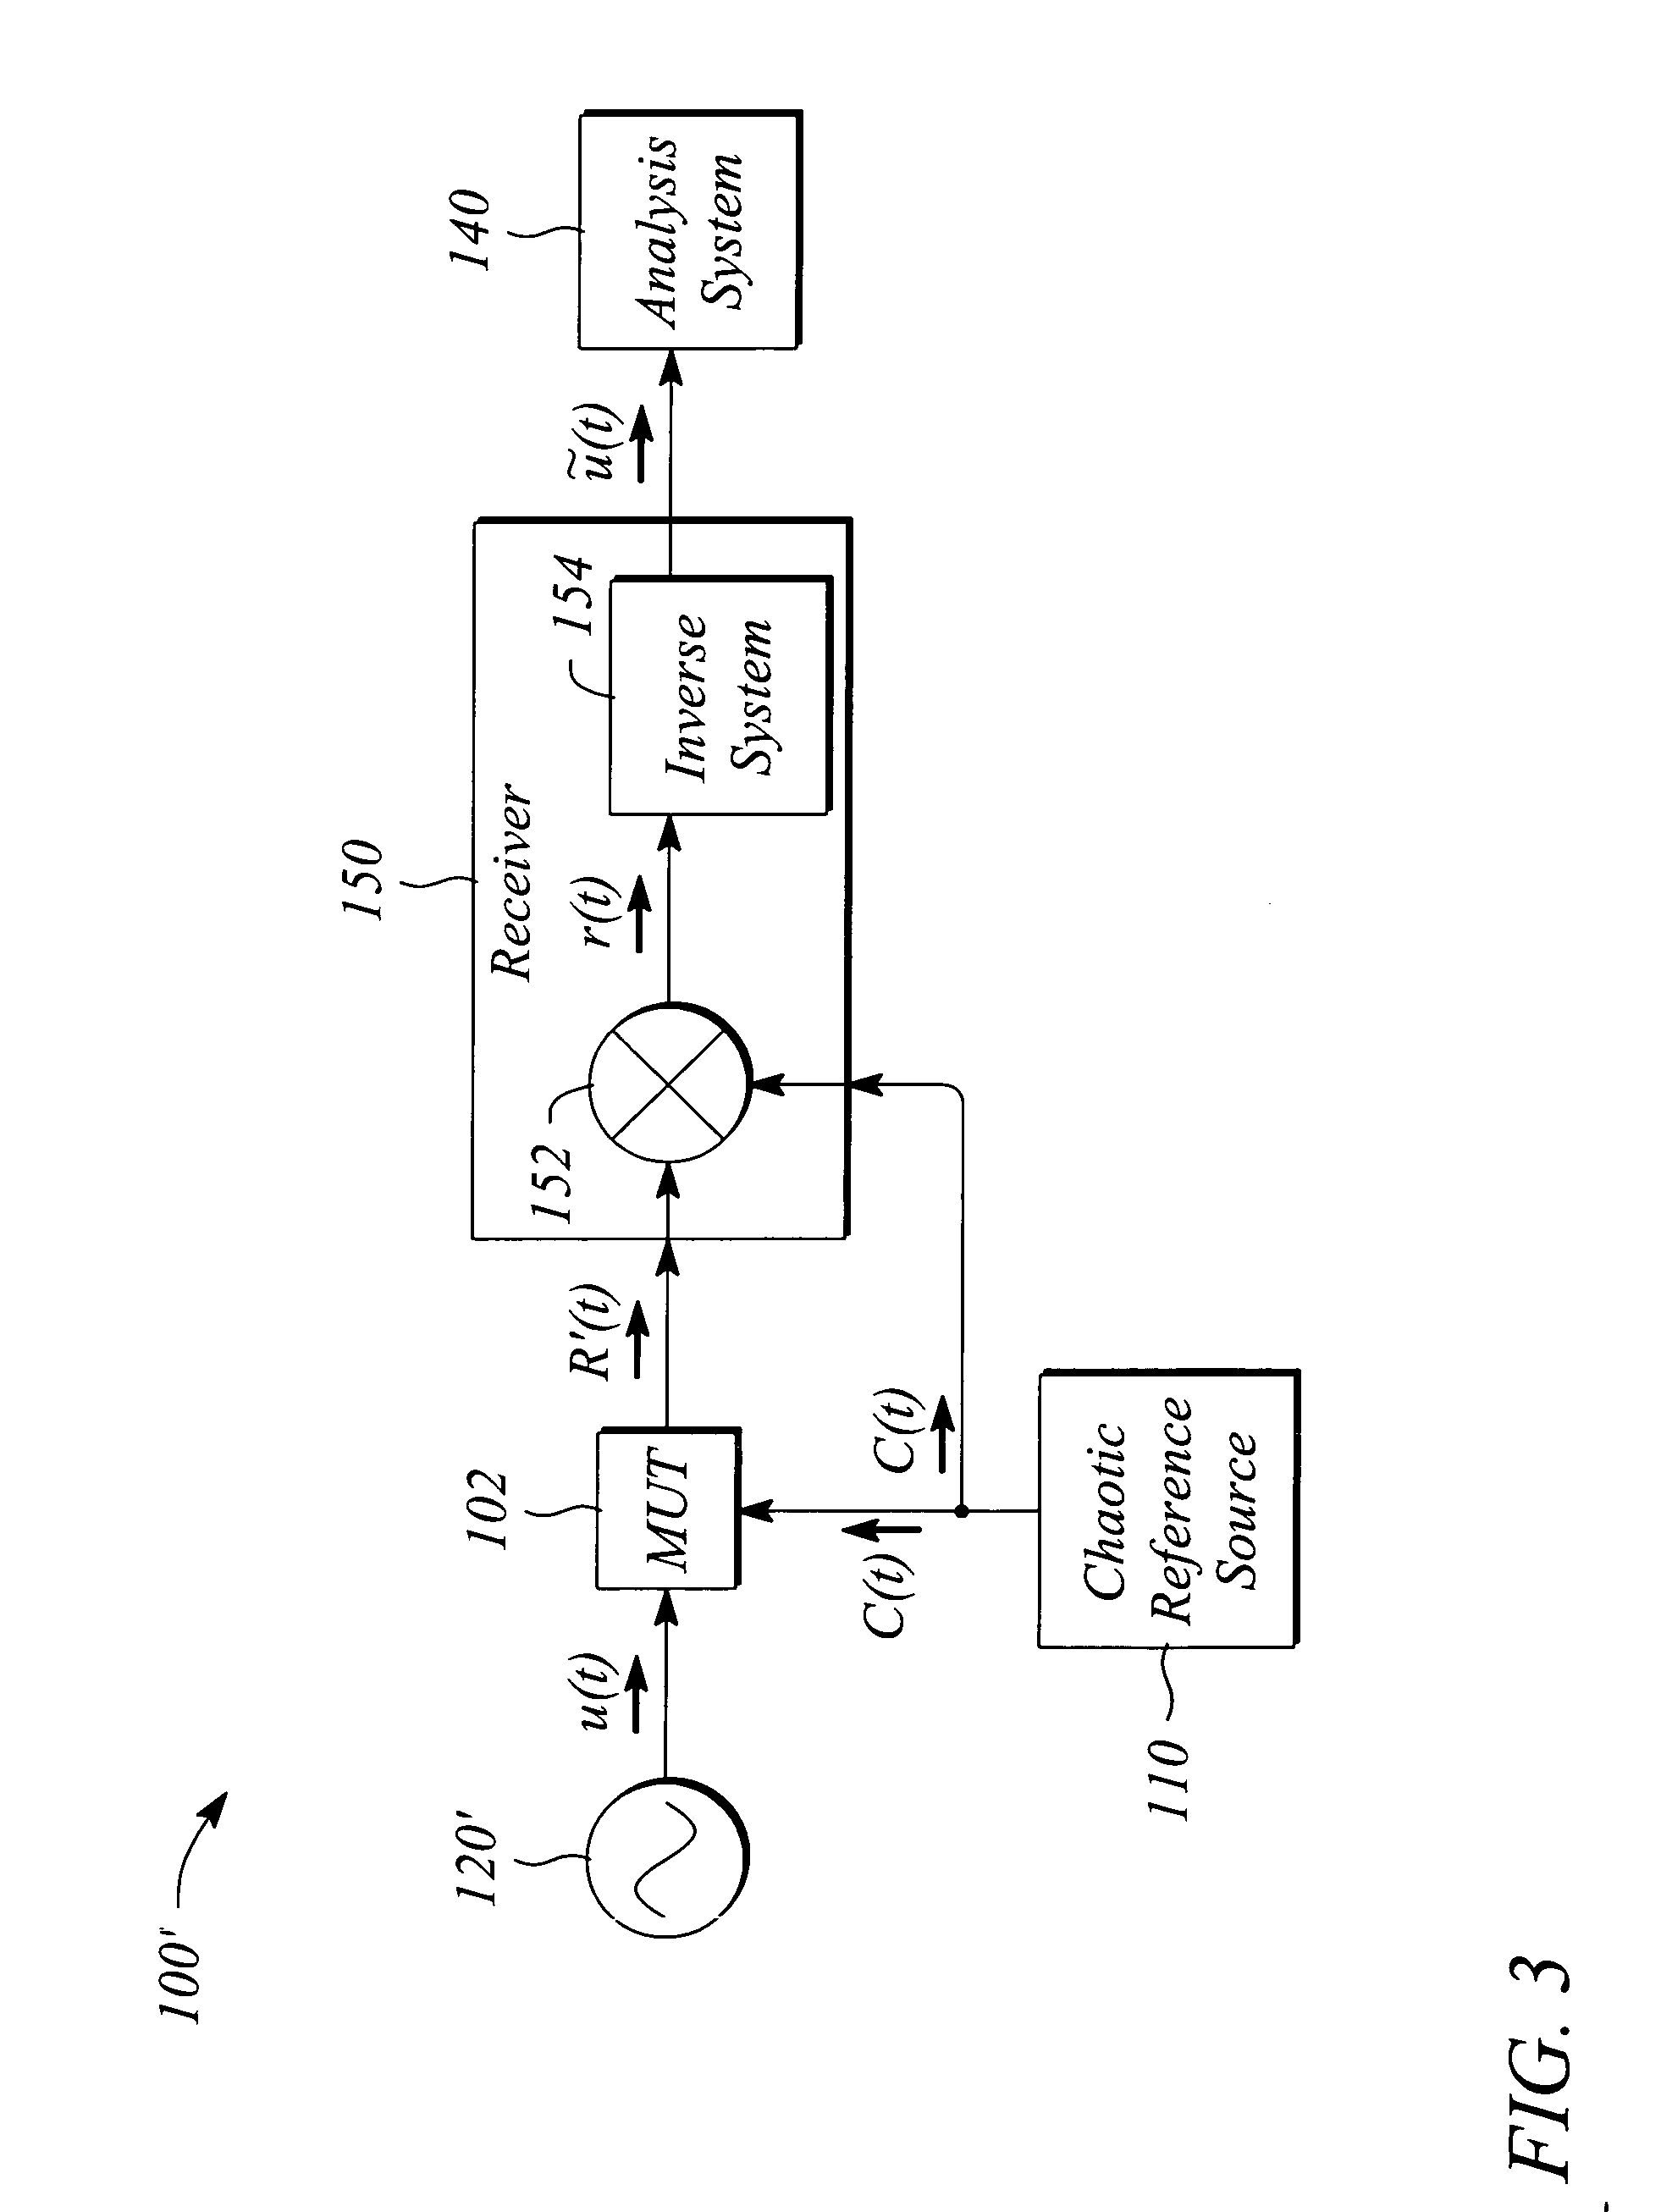 Mixer measurement system and method using a chaotic signal